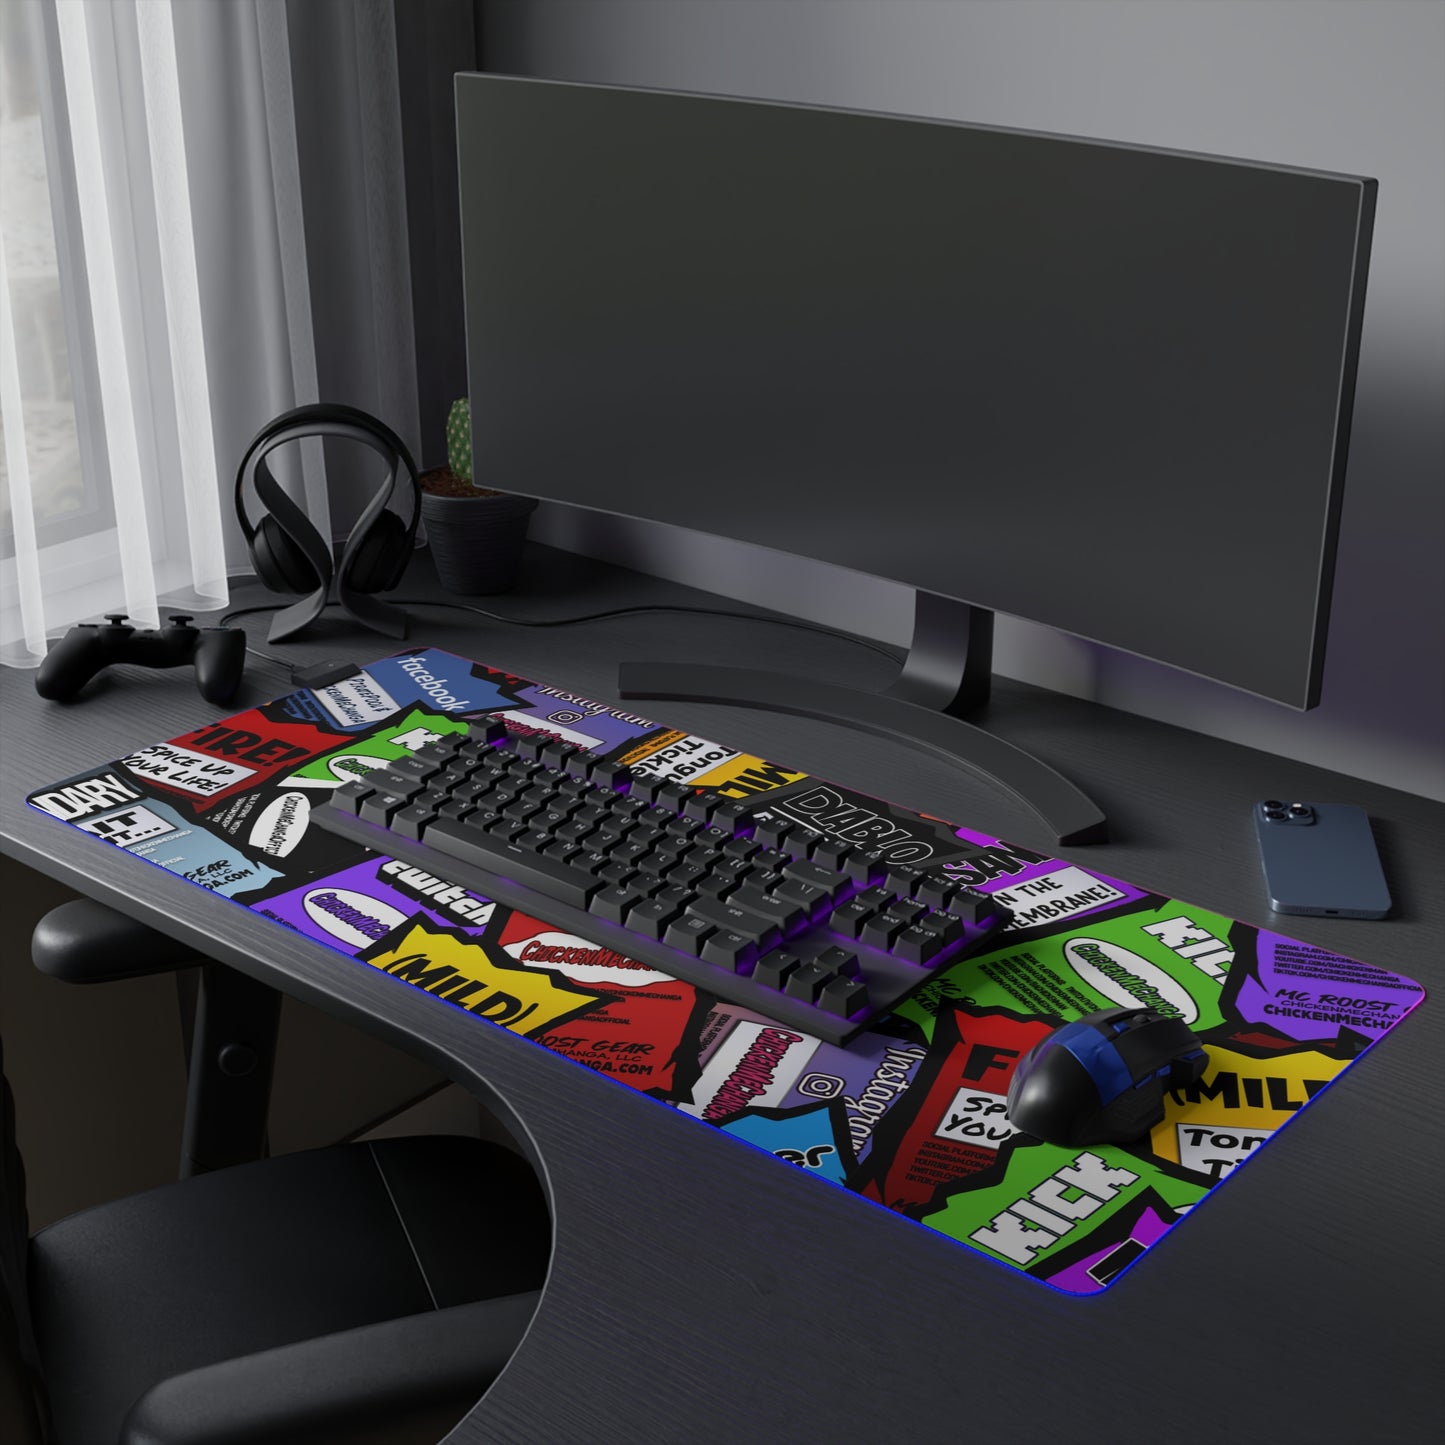 Saucy LED Gaming Mouse Pad